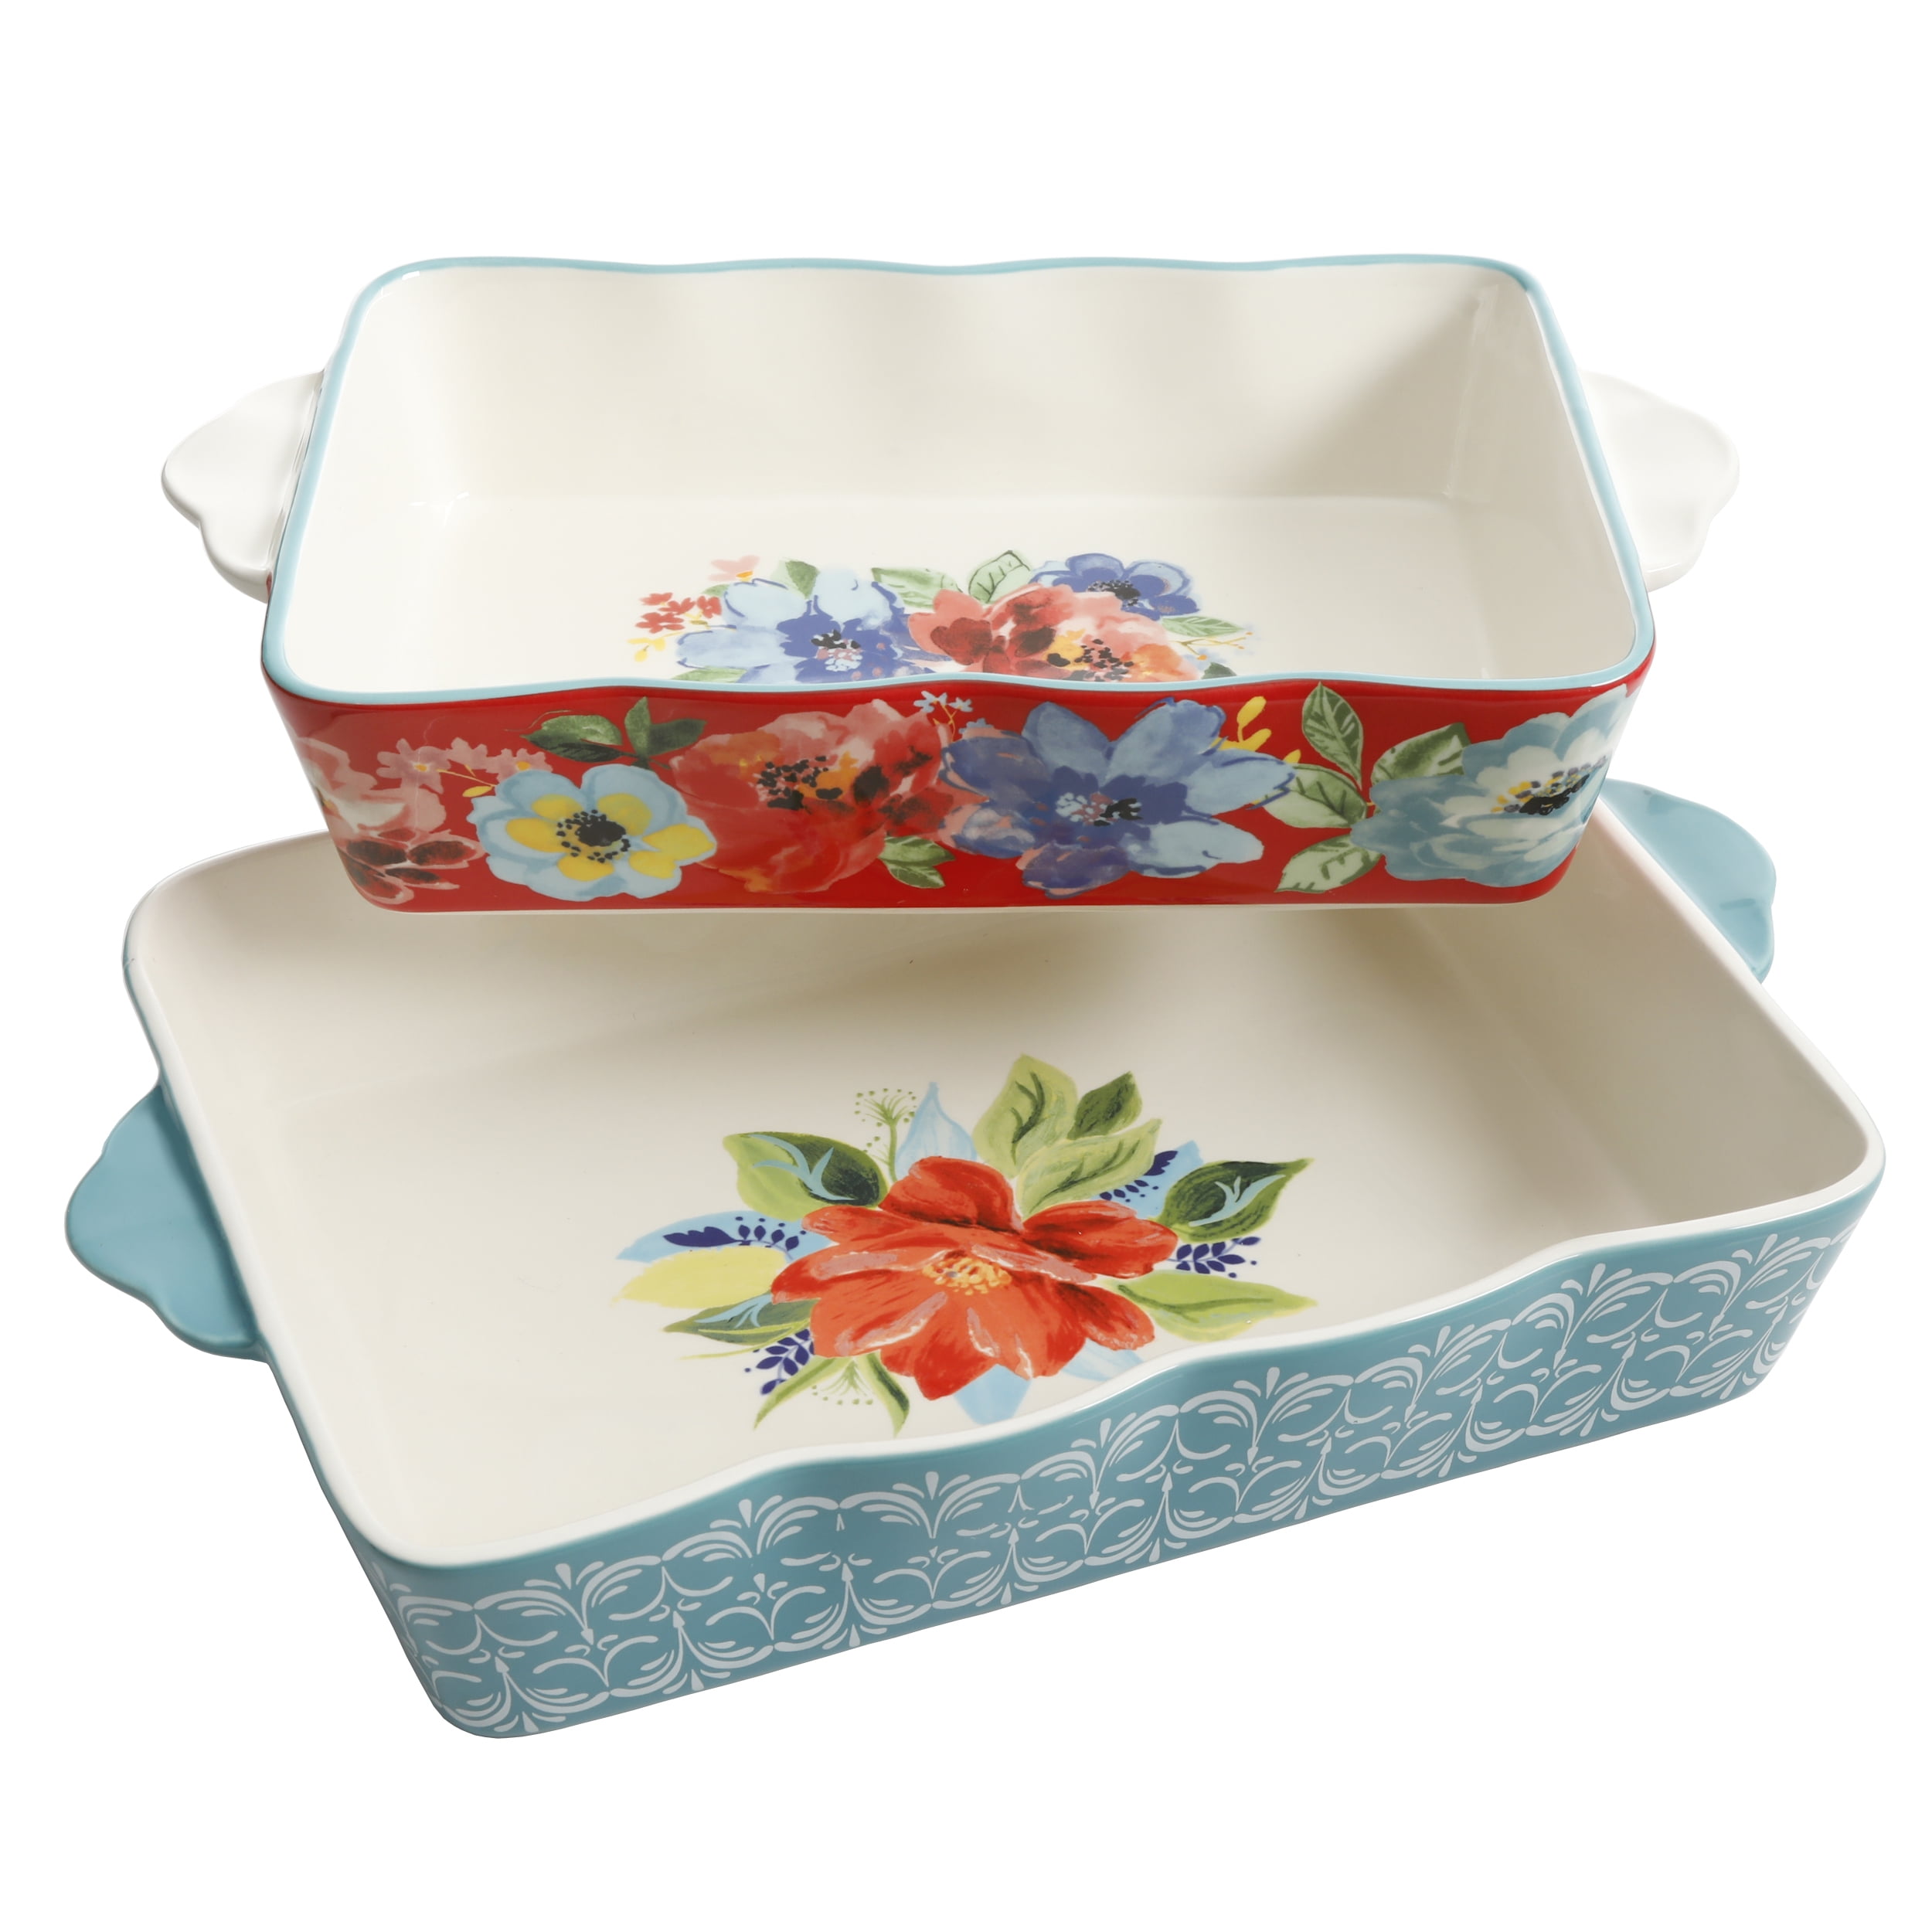 The Pioneer Woman Merry Meadows 2-Piece Rectangular Ceramic Holiday Bakeware Set, Size: Assorted